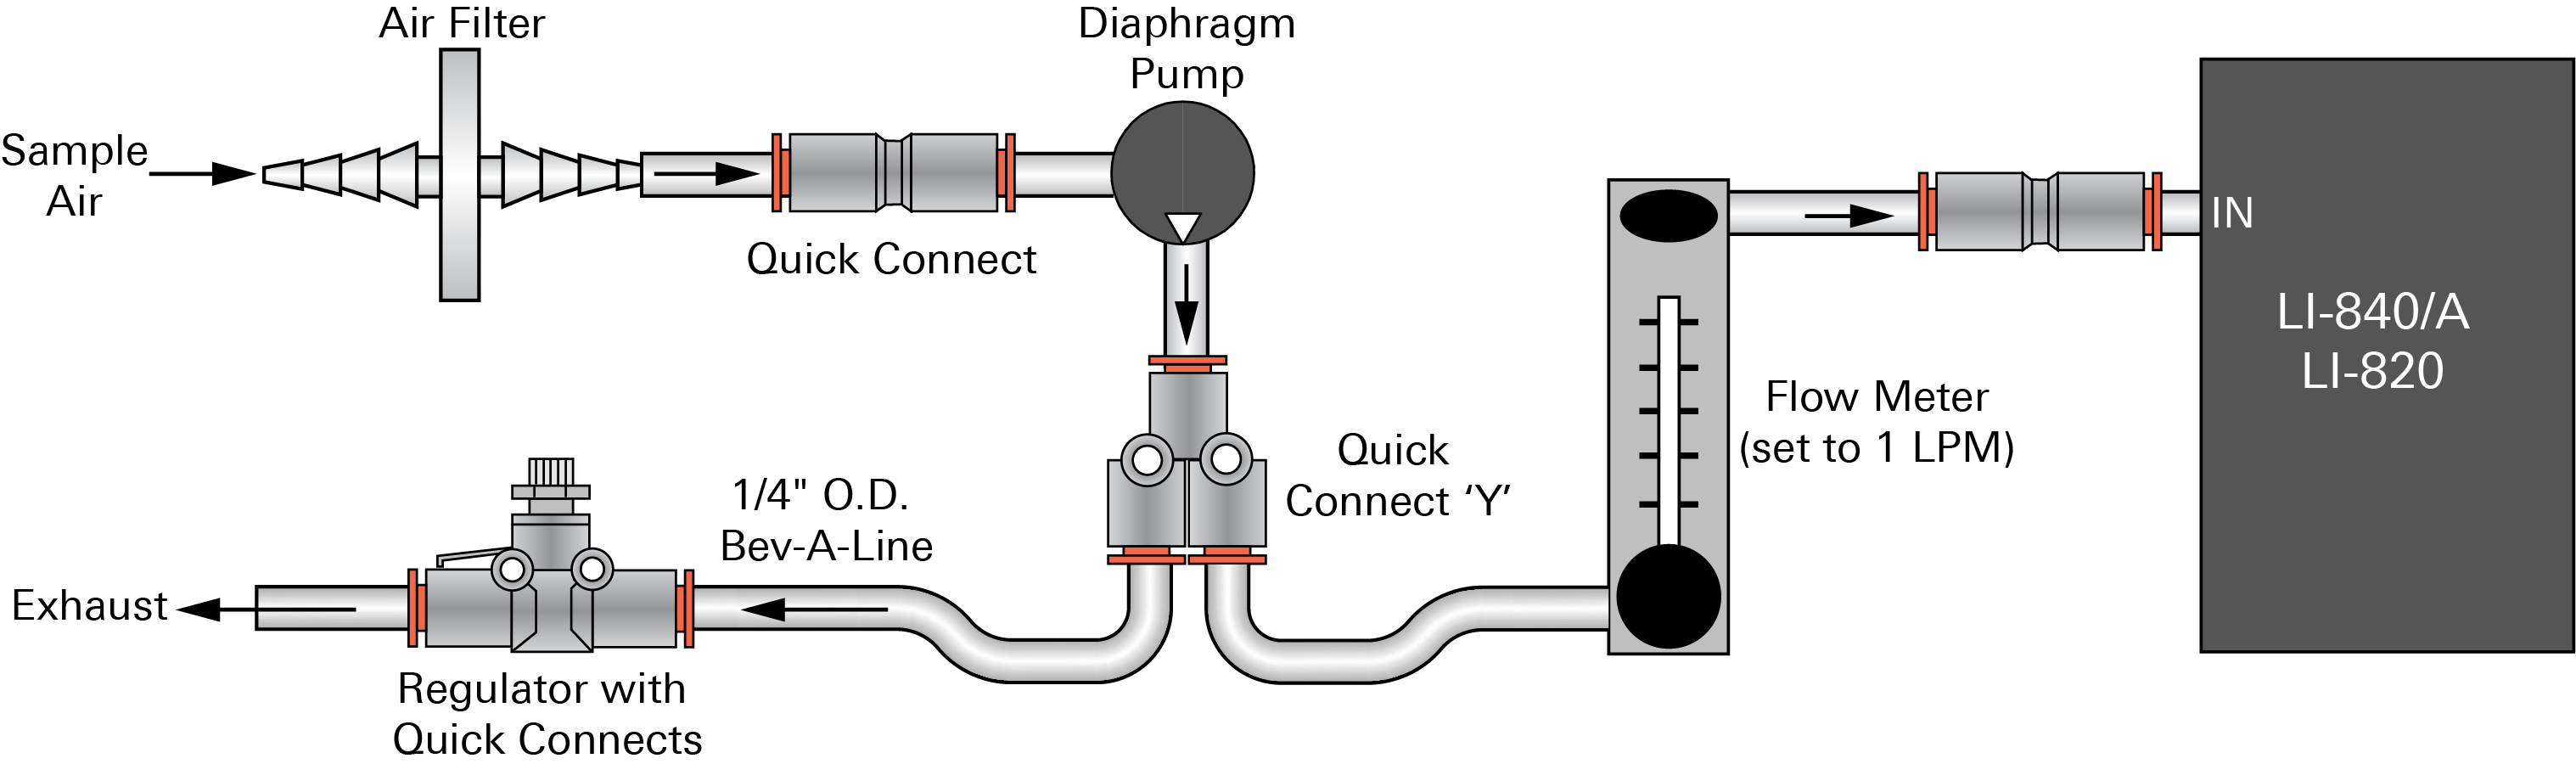 Plumbing example for large volumes of air